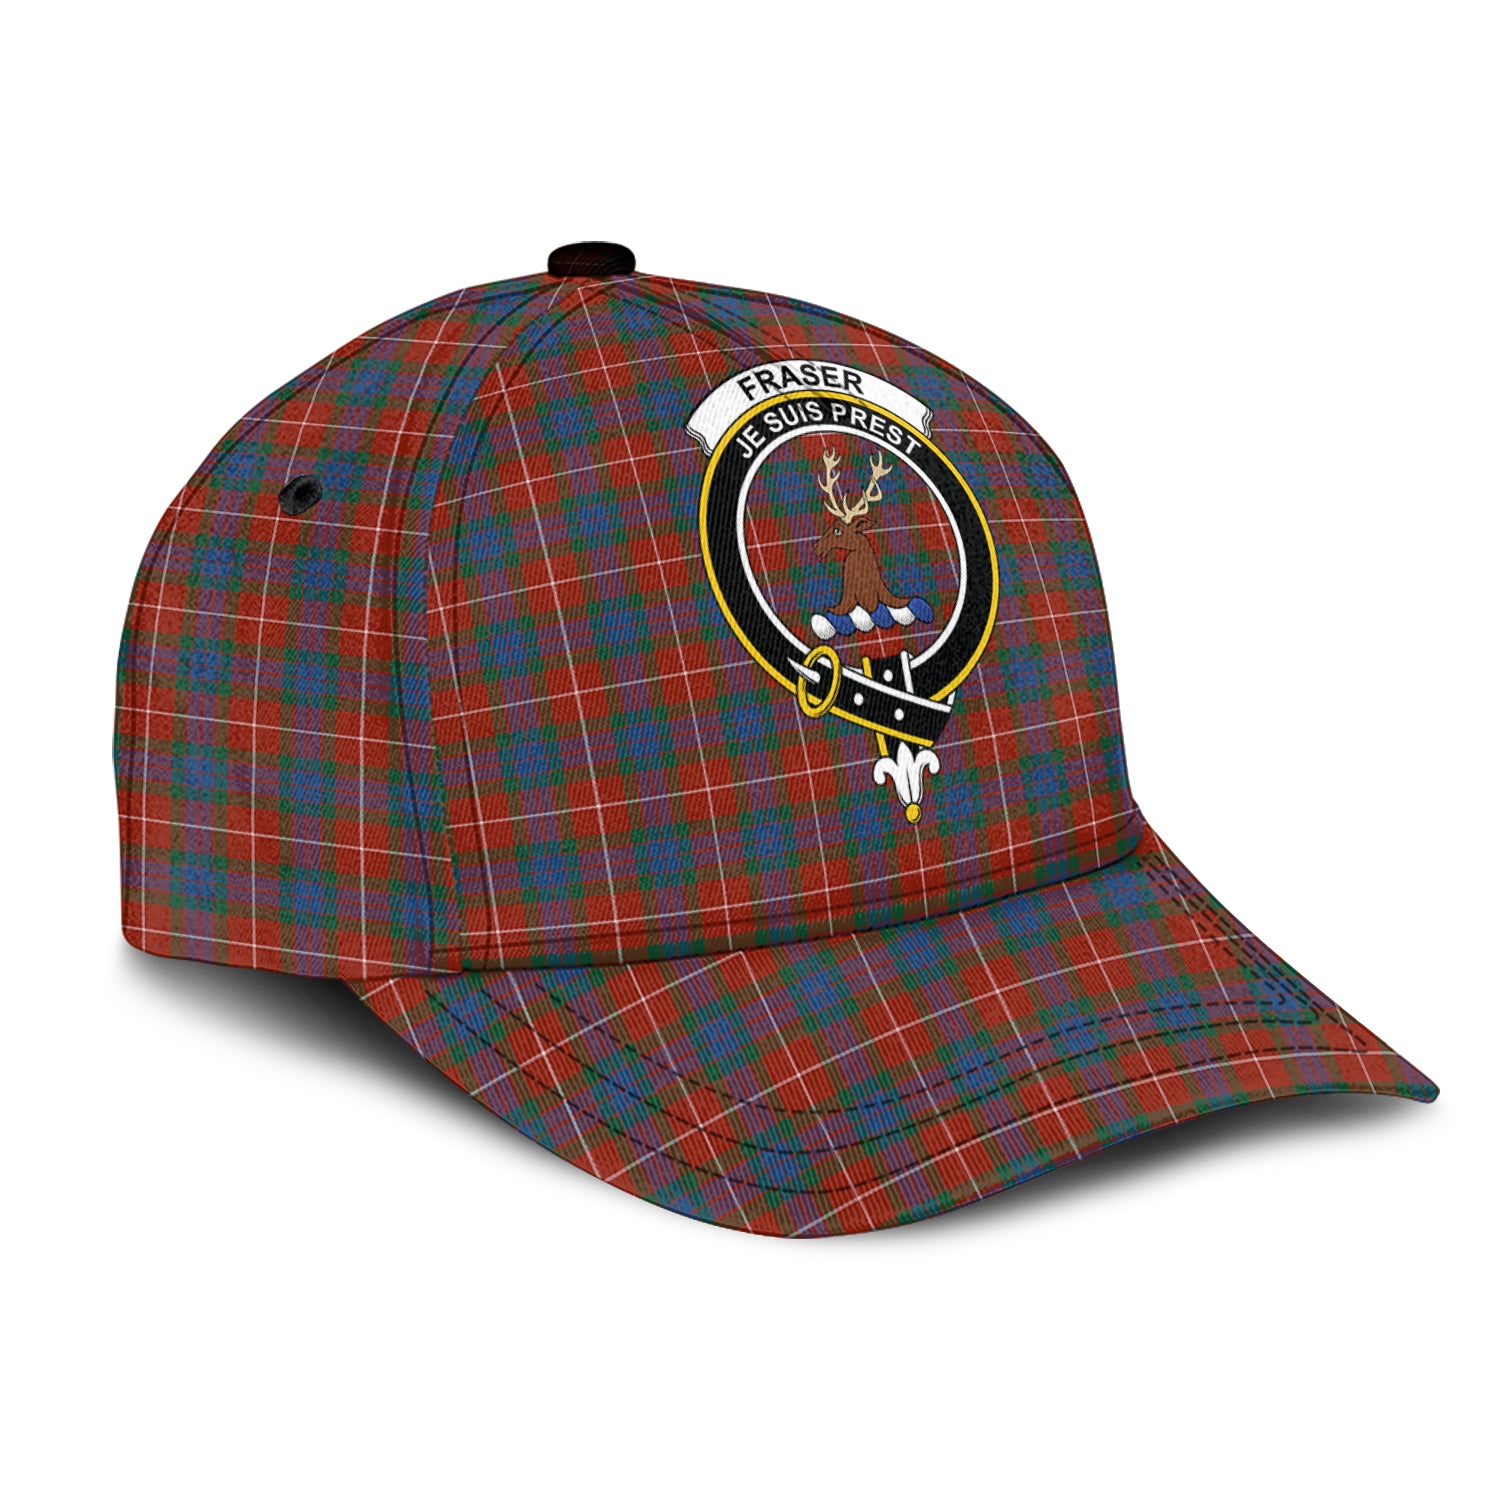 fraser-ancient-tartan-classic-cap-with-family-crest